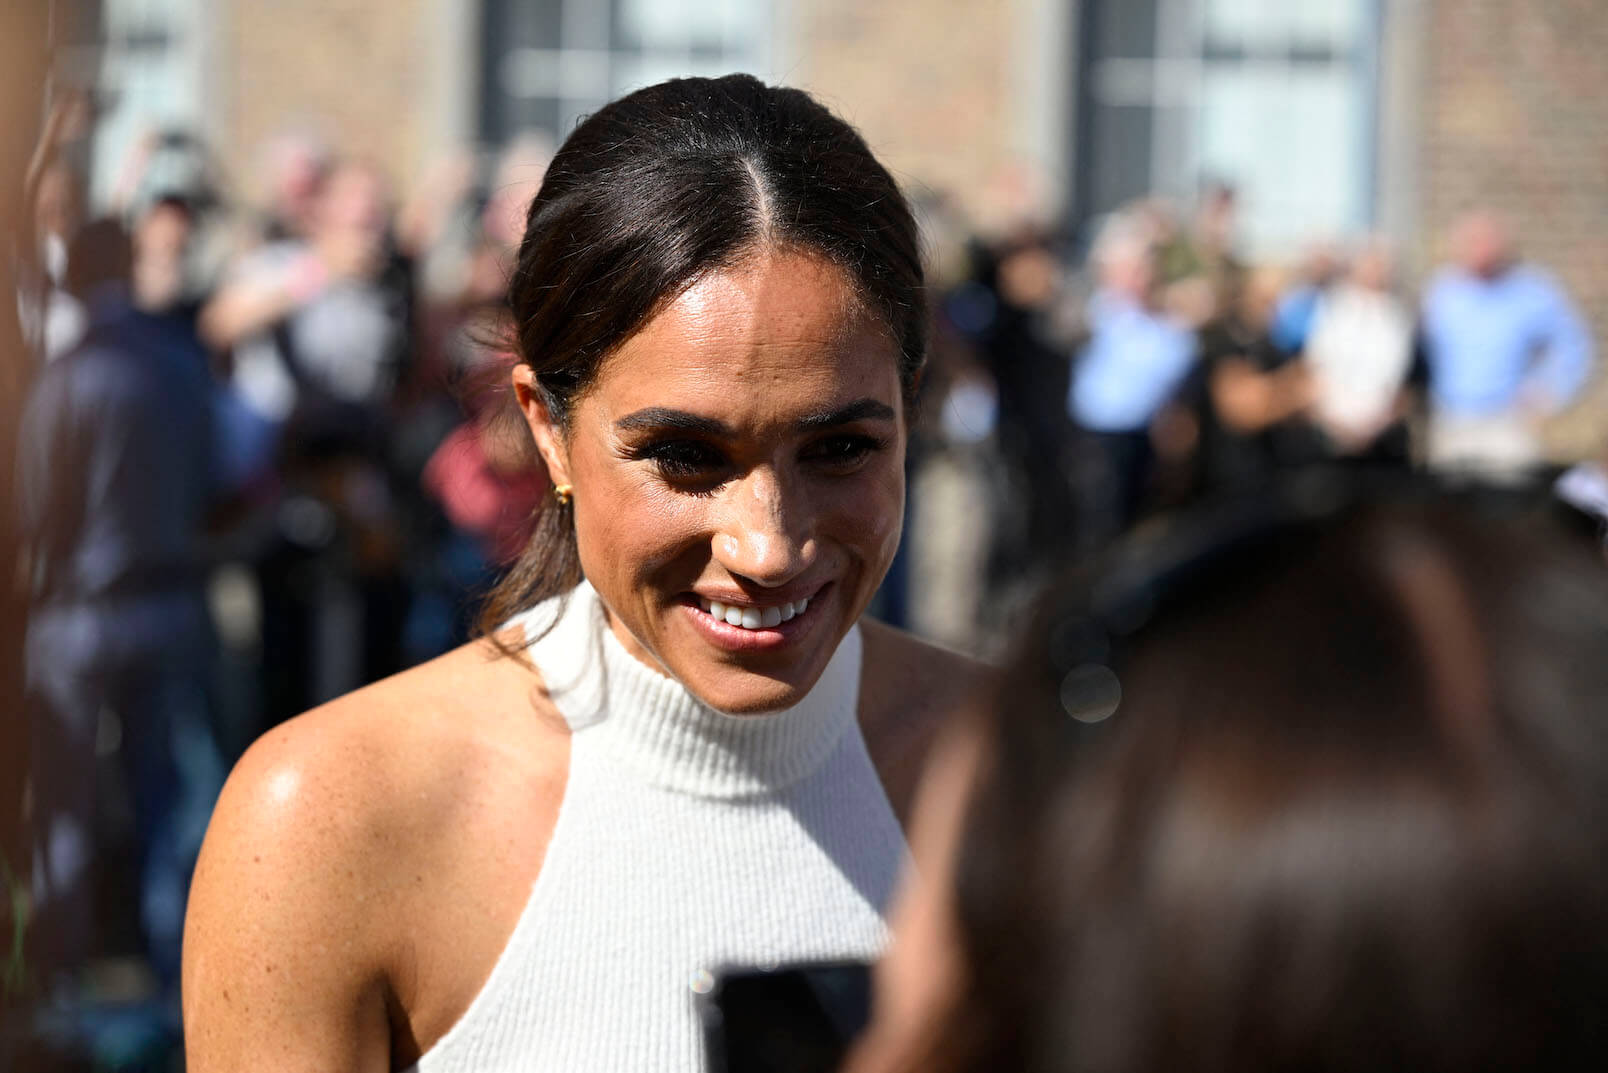 Meghan Markle smiling and talking with a wellwisher as she leaves the city hall in Duesseldorf, Germany